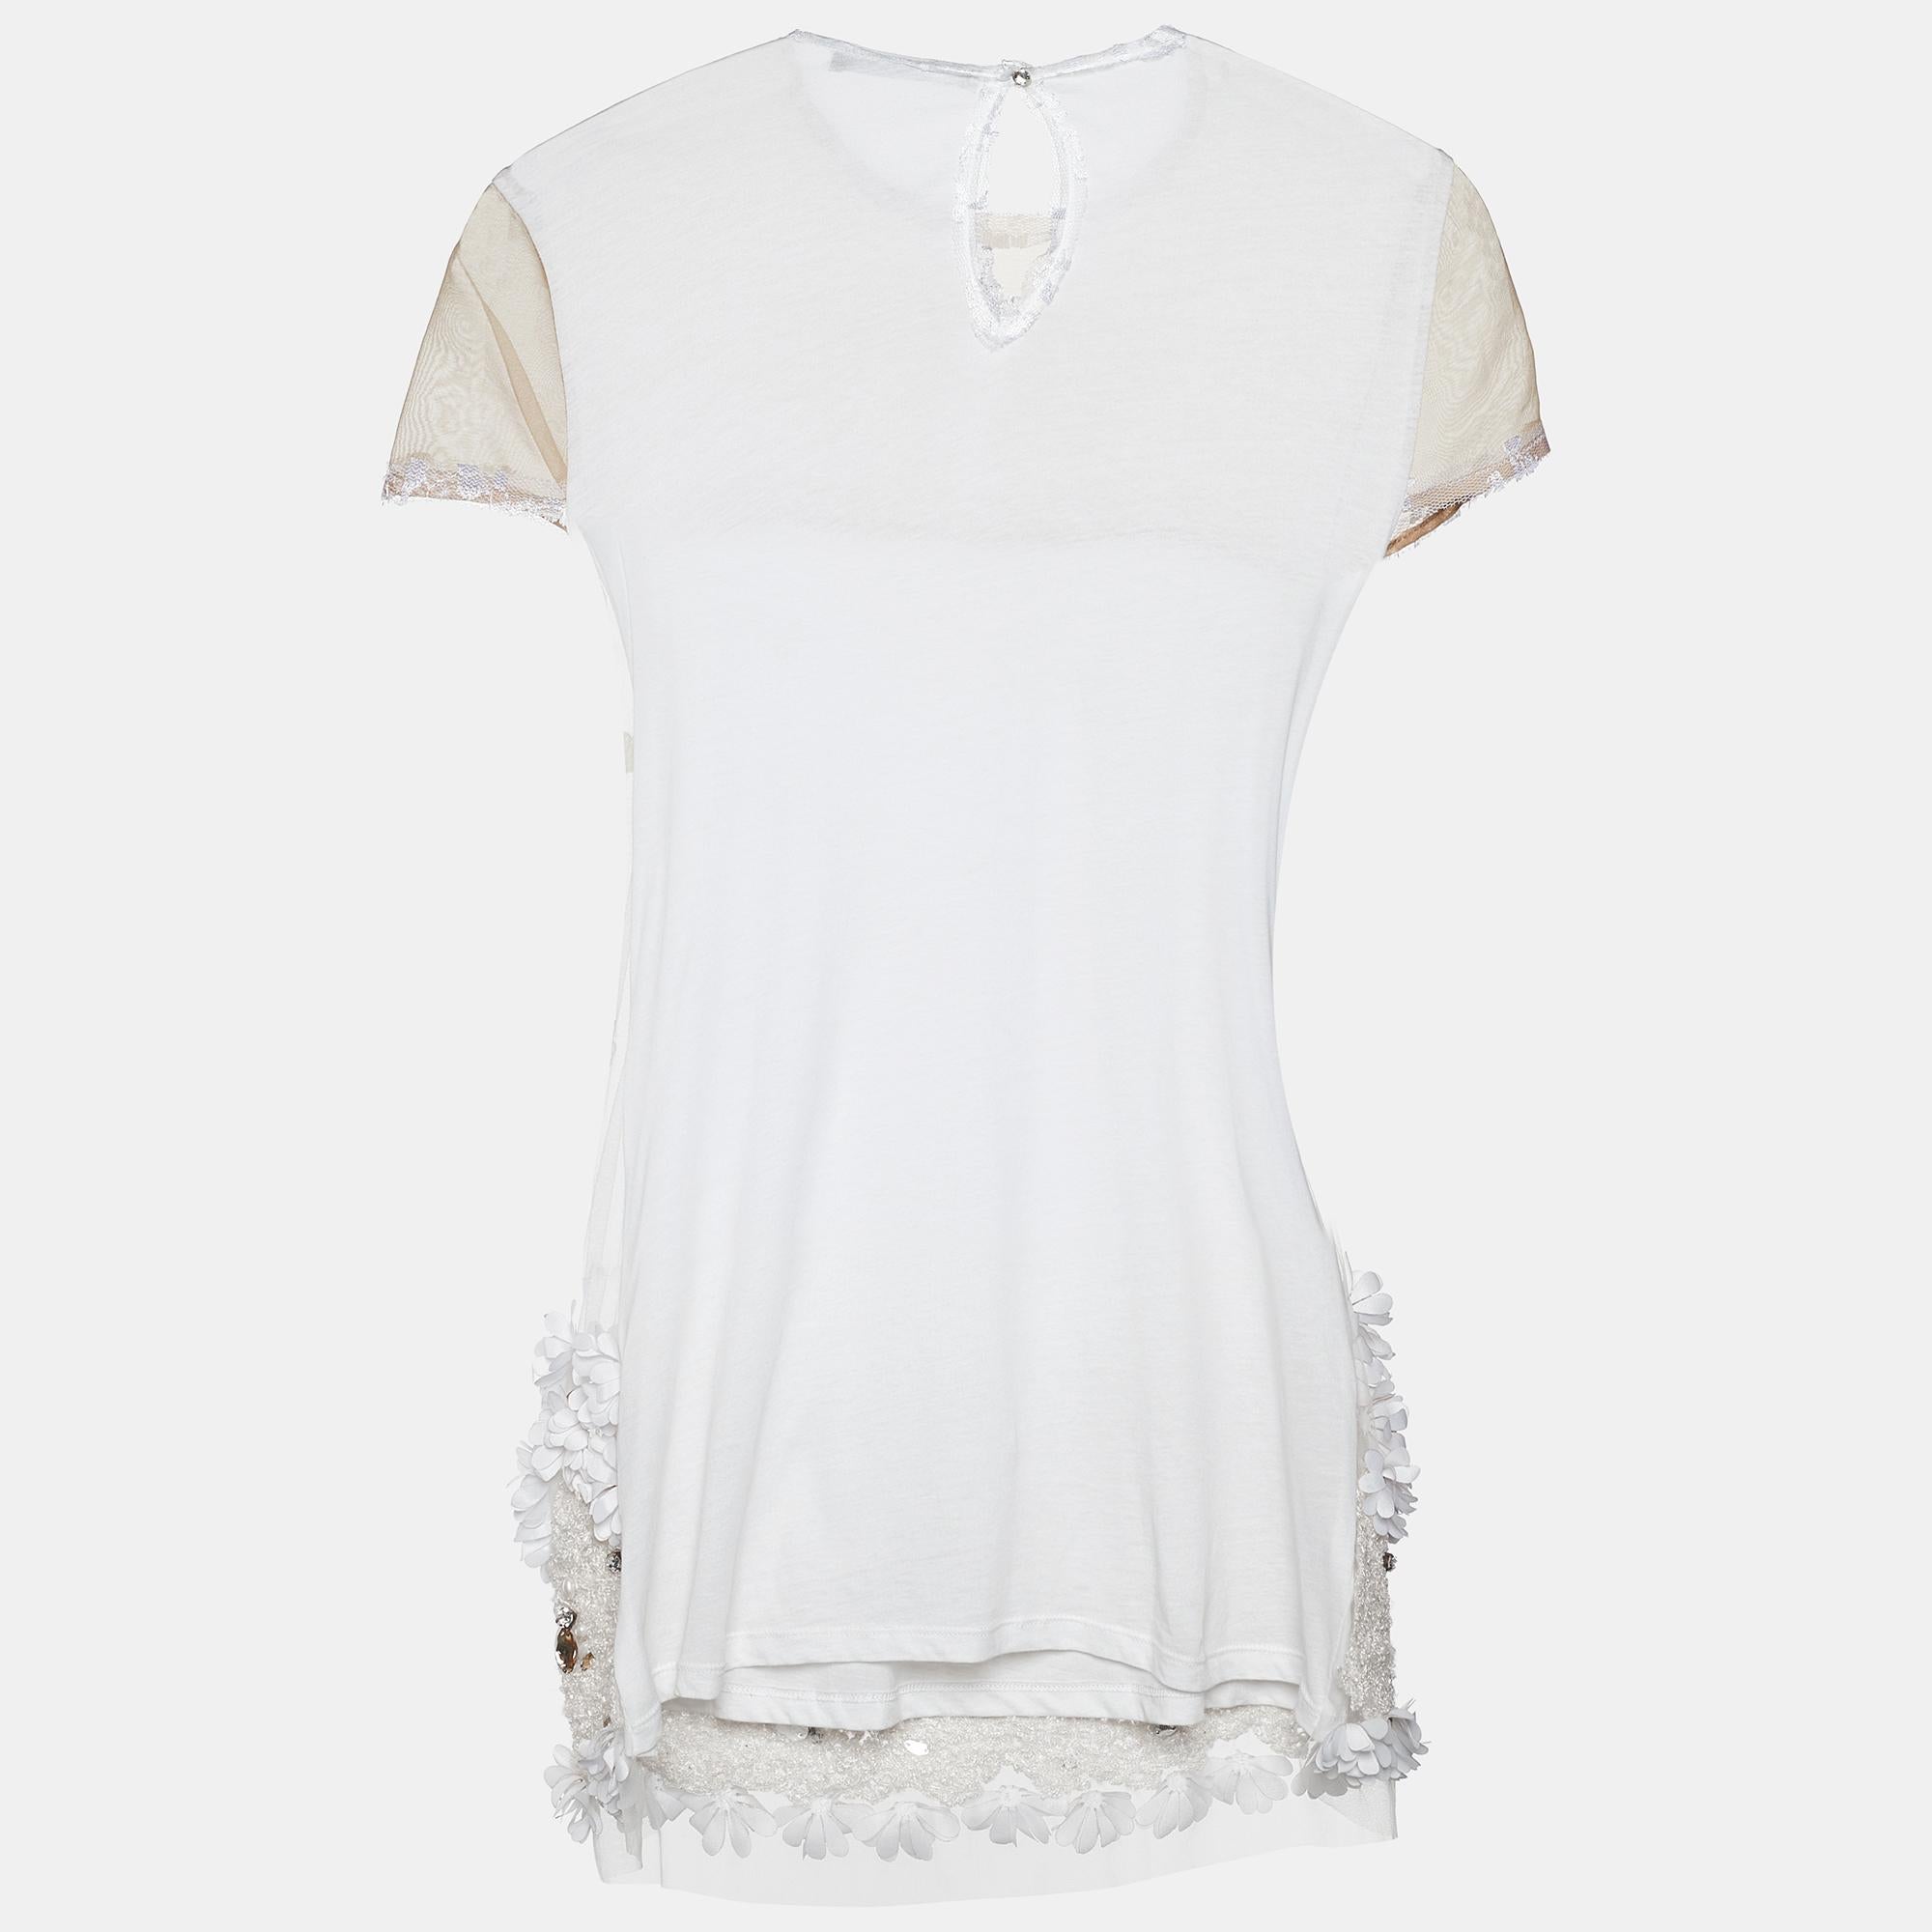 This top from Max Mara is the best pick to look stylish. Stitched using white mesh fabric, this top features crystal and sequin embellishments. It comes with a buttoned closure and short sleeves. Team it up with jeans to step out for casual